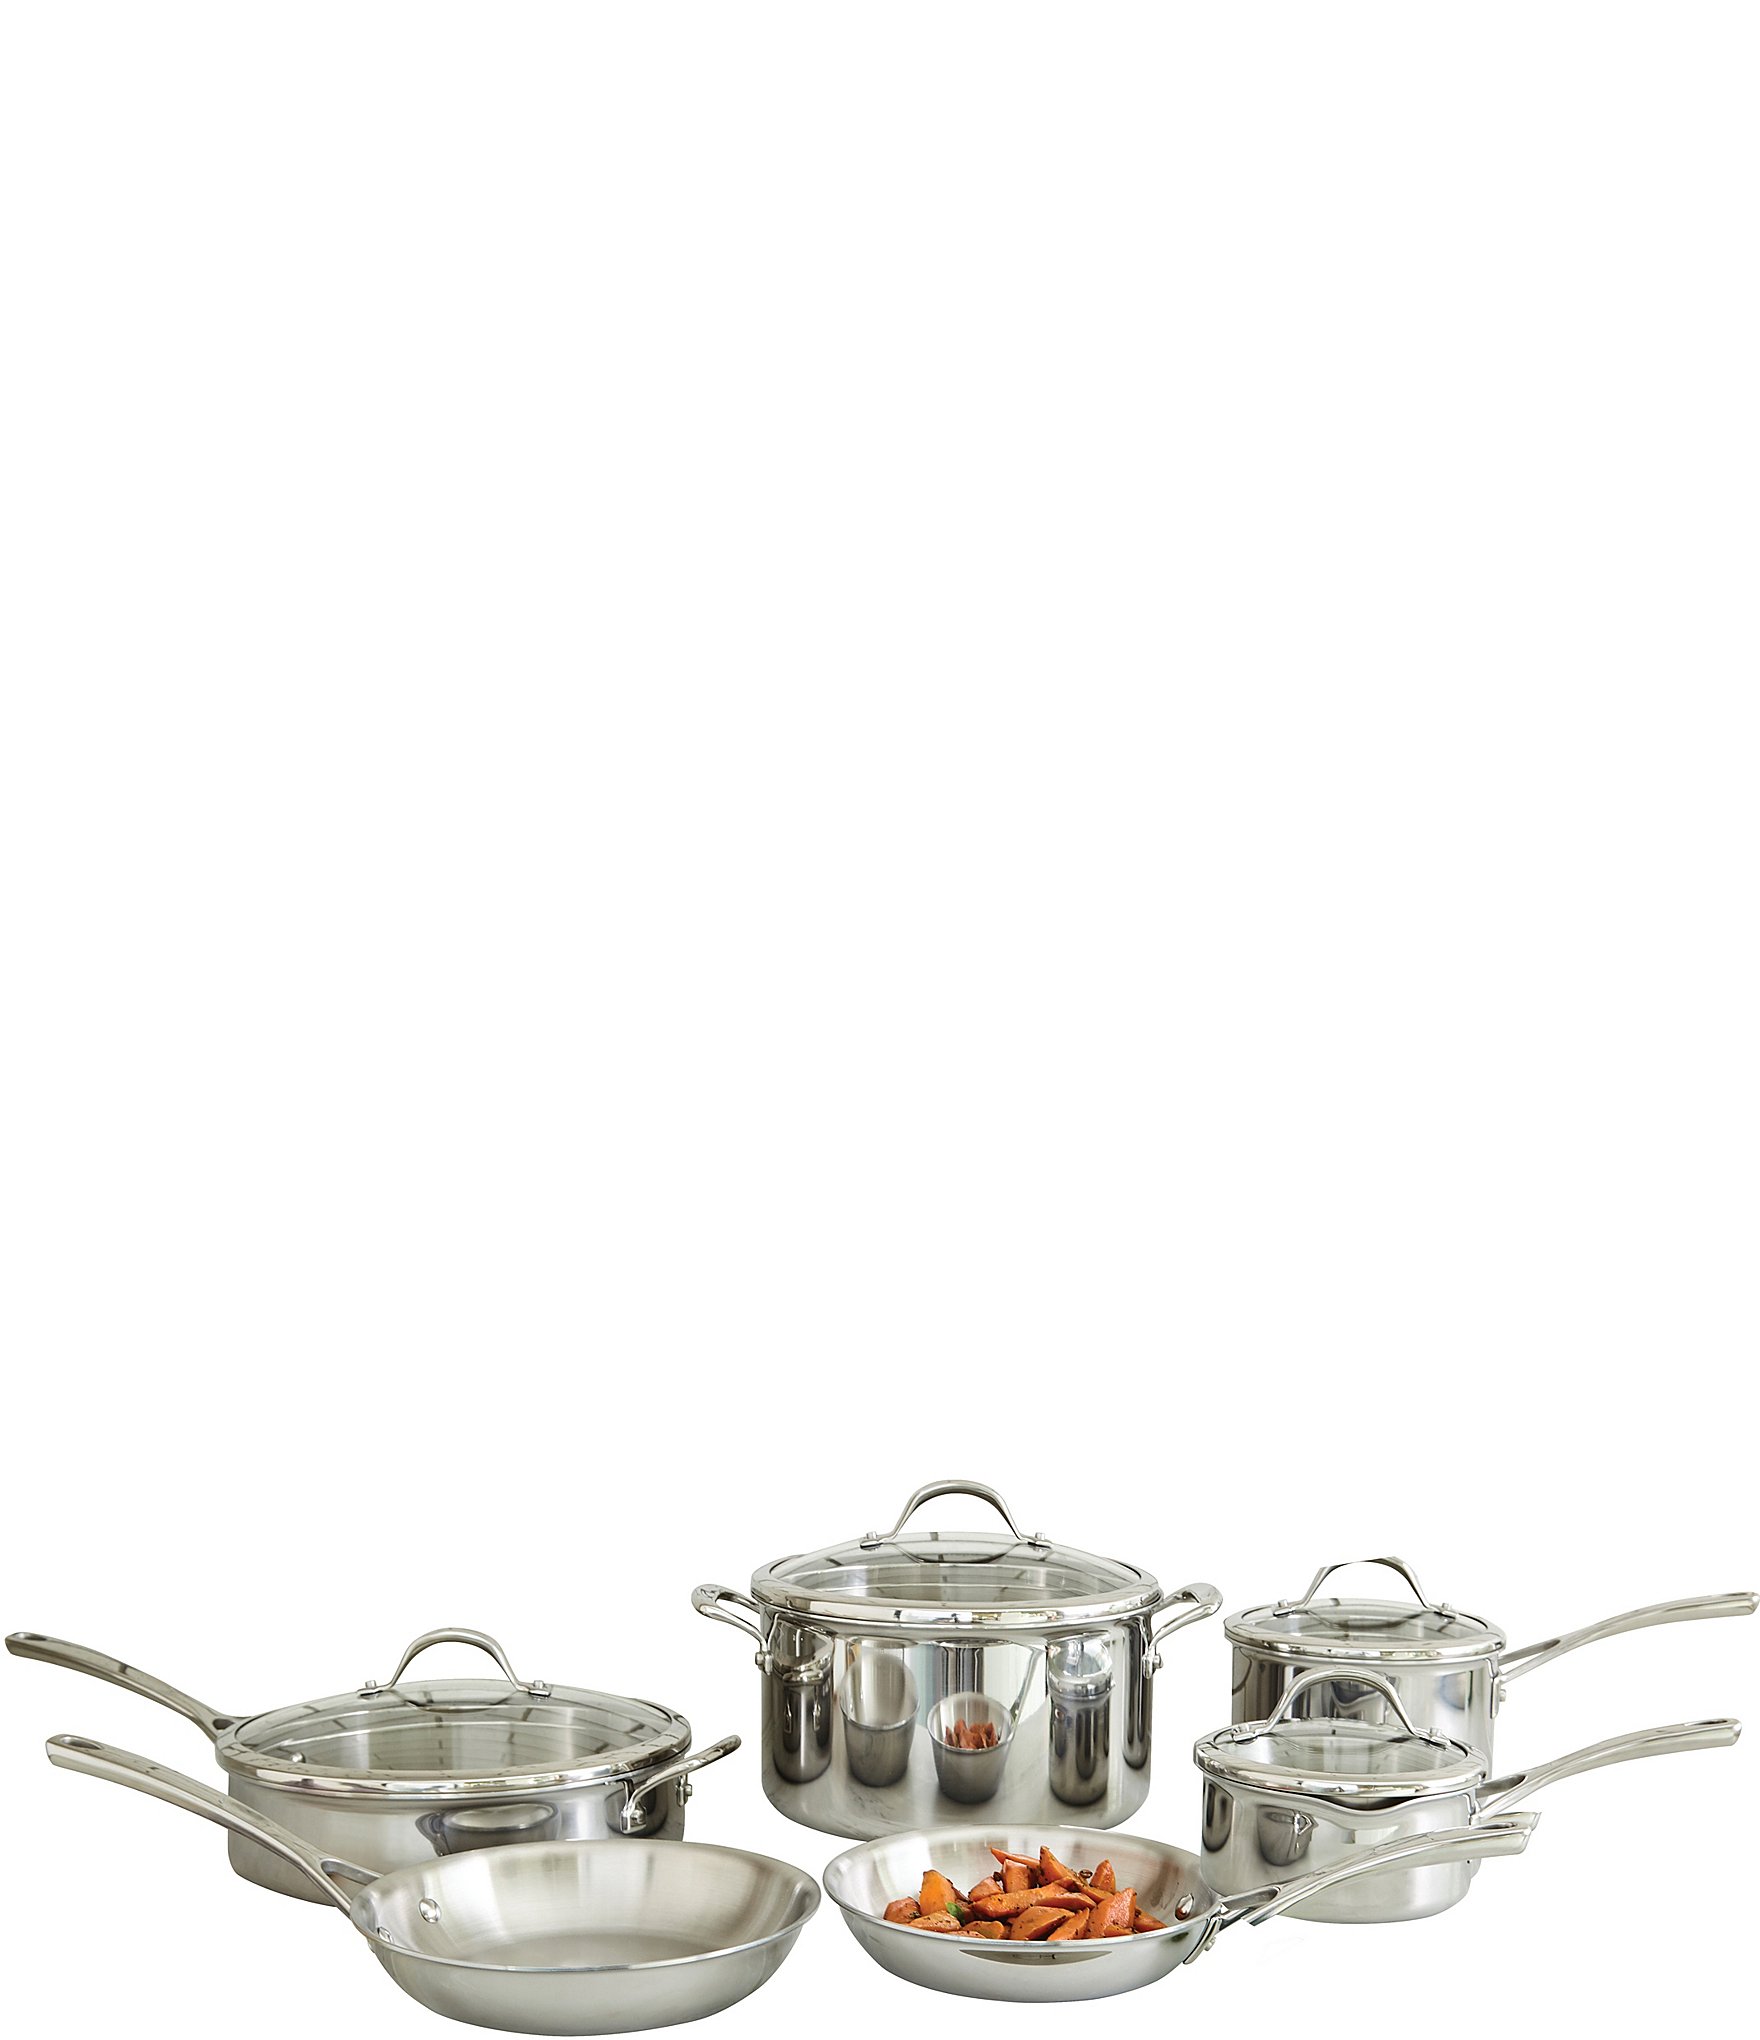 https://dimg.dillards.com/is/image/DillardsZoom/zoom/southern-living-tri-ply-clad-stainless-steel-10-piece-cookware-set/05118385_zi.jpg